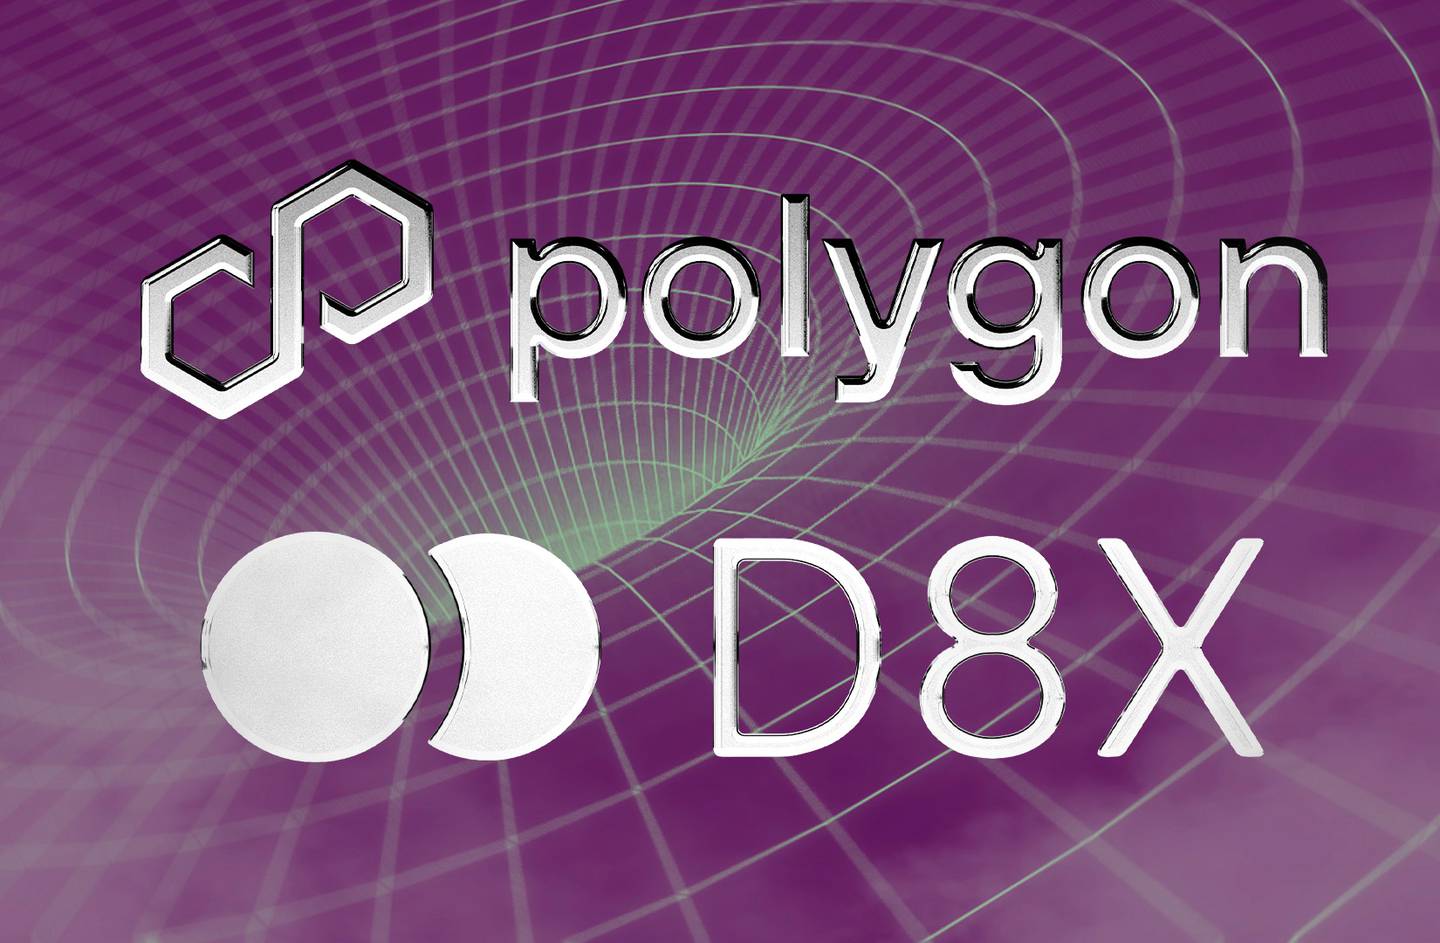 Polygon and D8X logos over a wormhole structure background